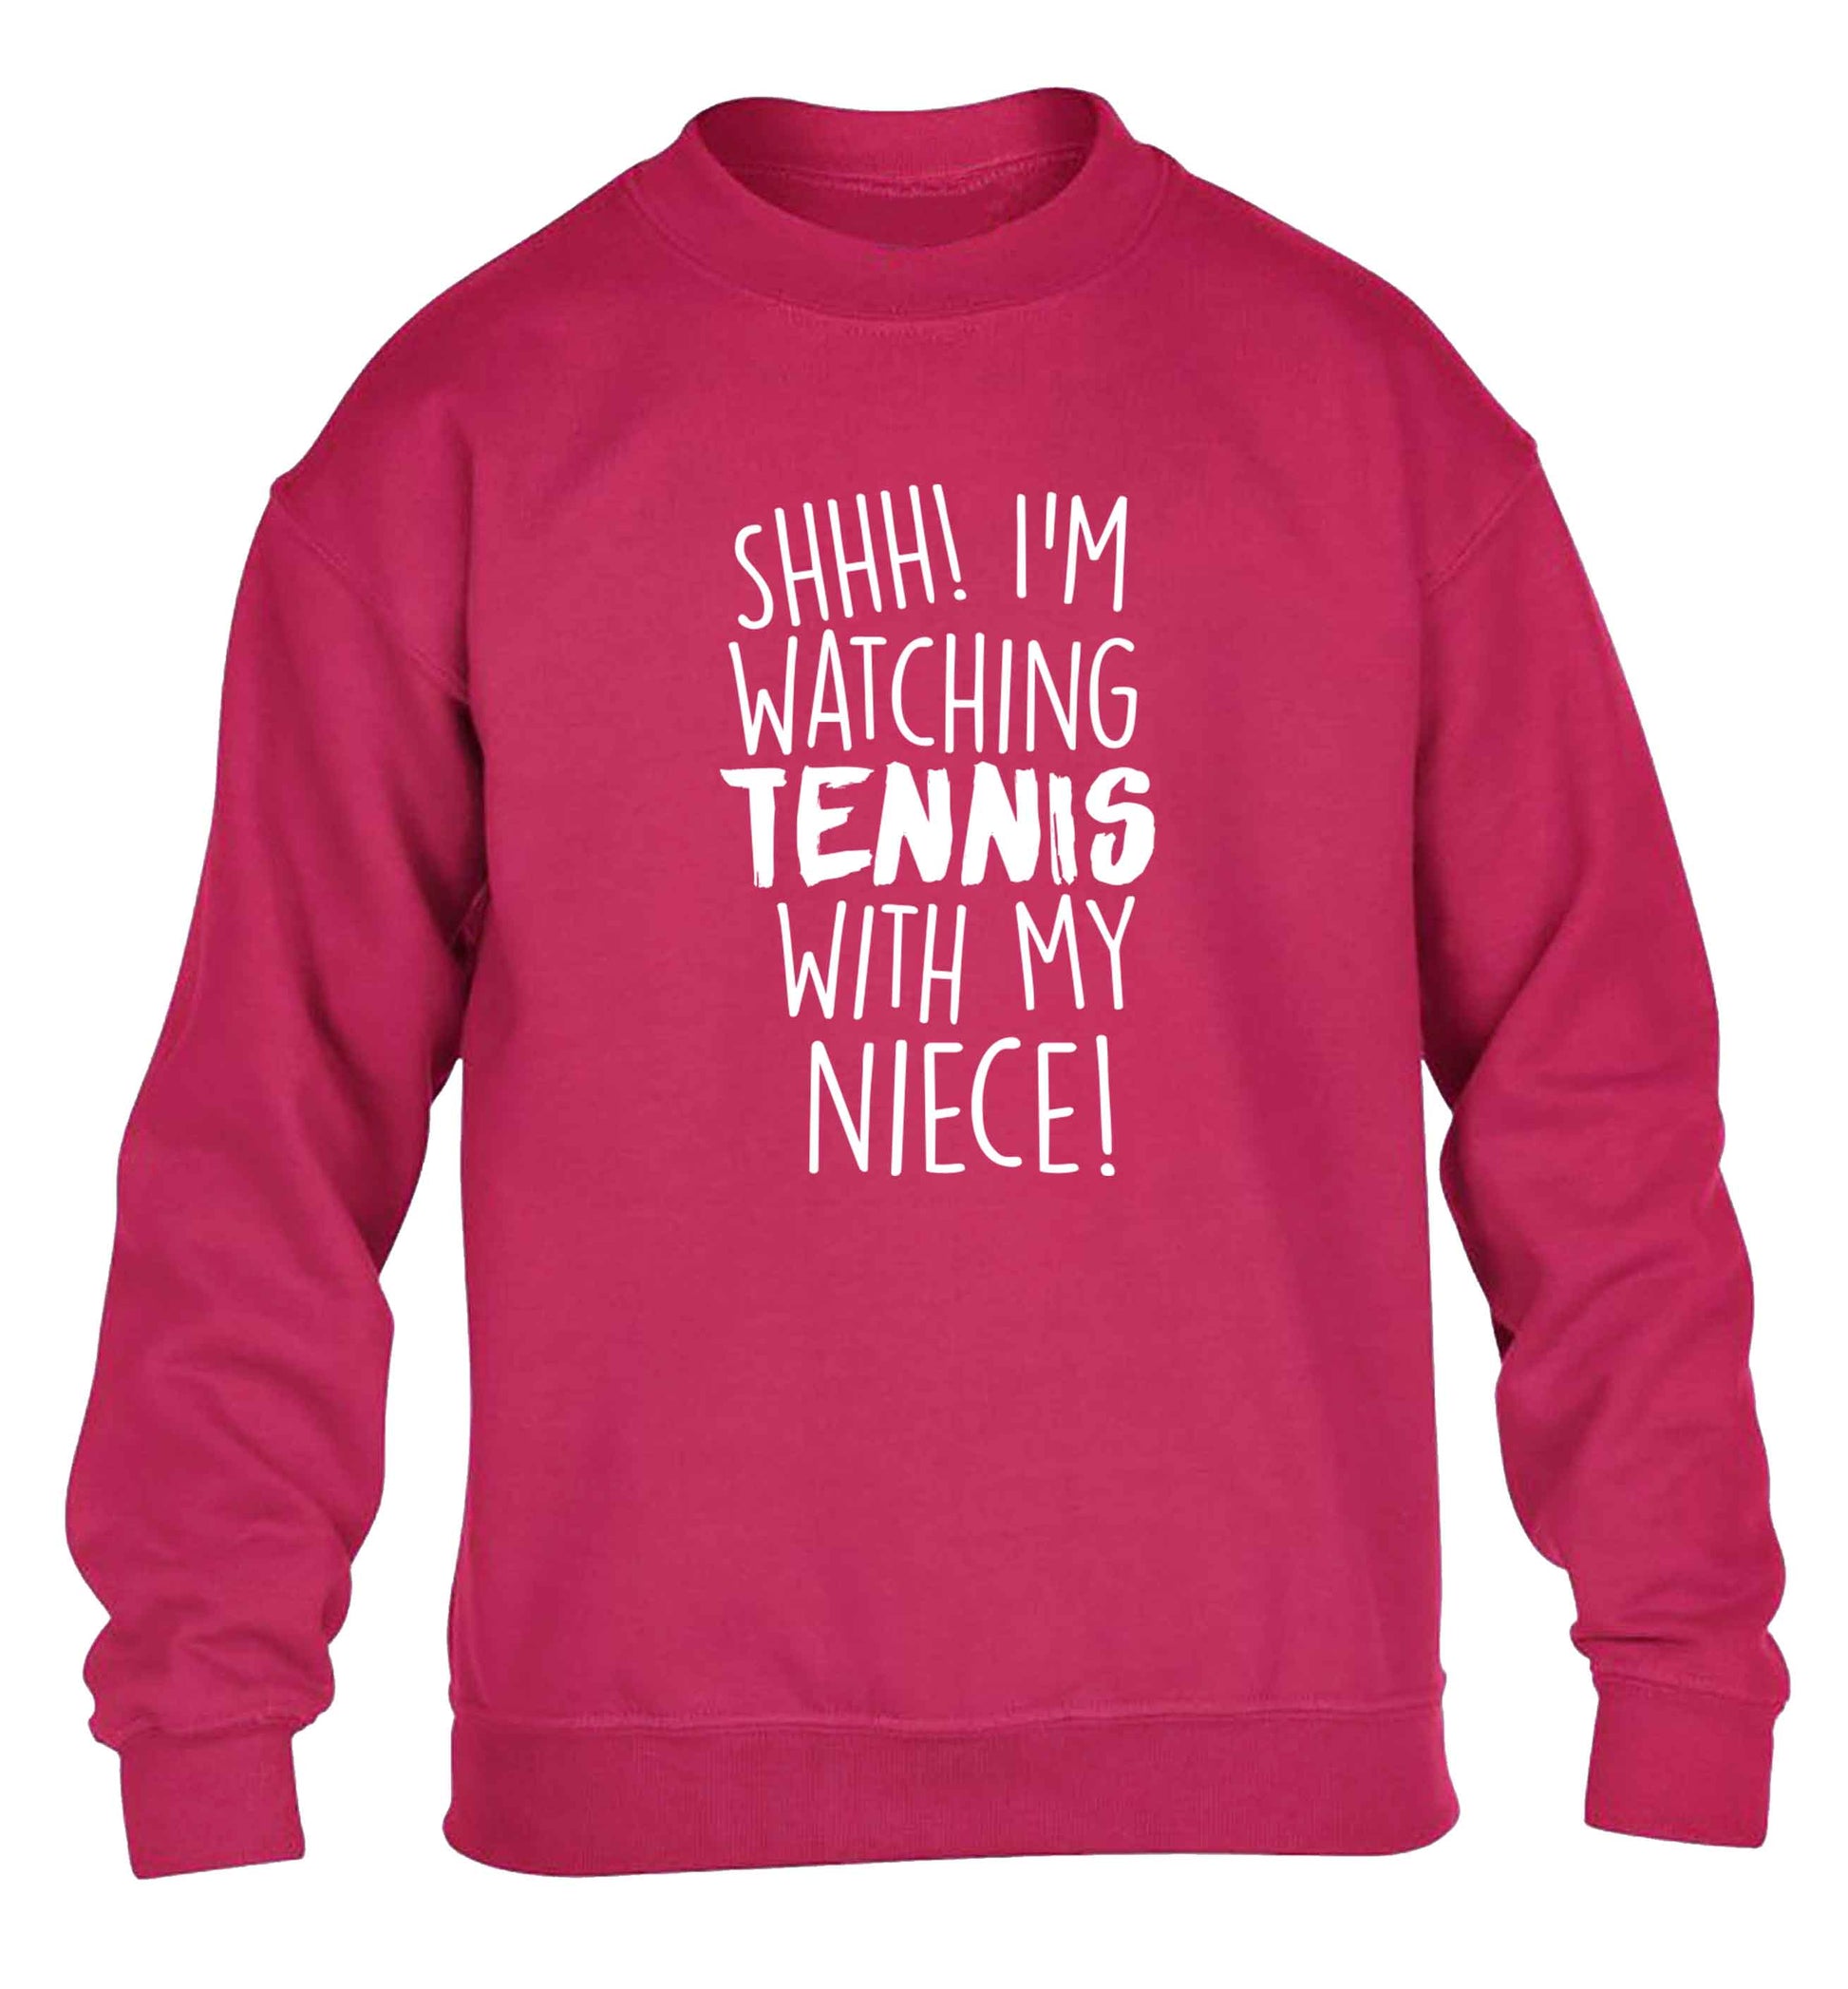 Shh! I'm watching tennis with my niece! children's pink sweater 12-13 Years